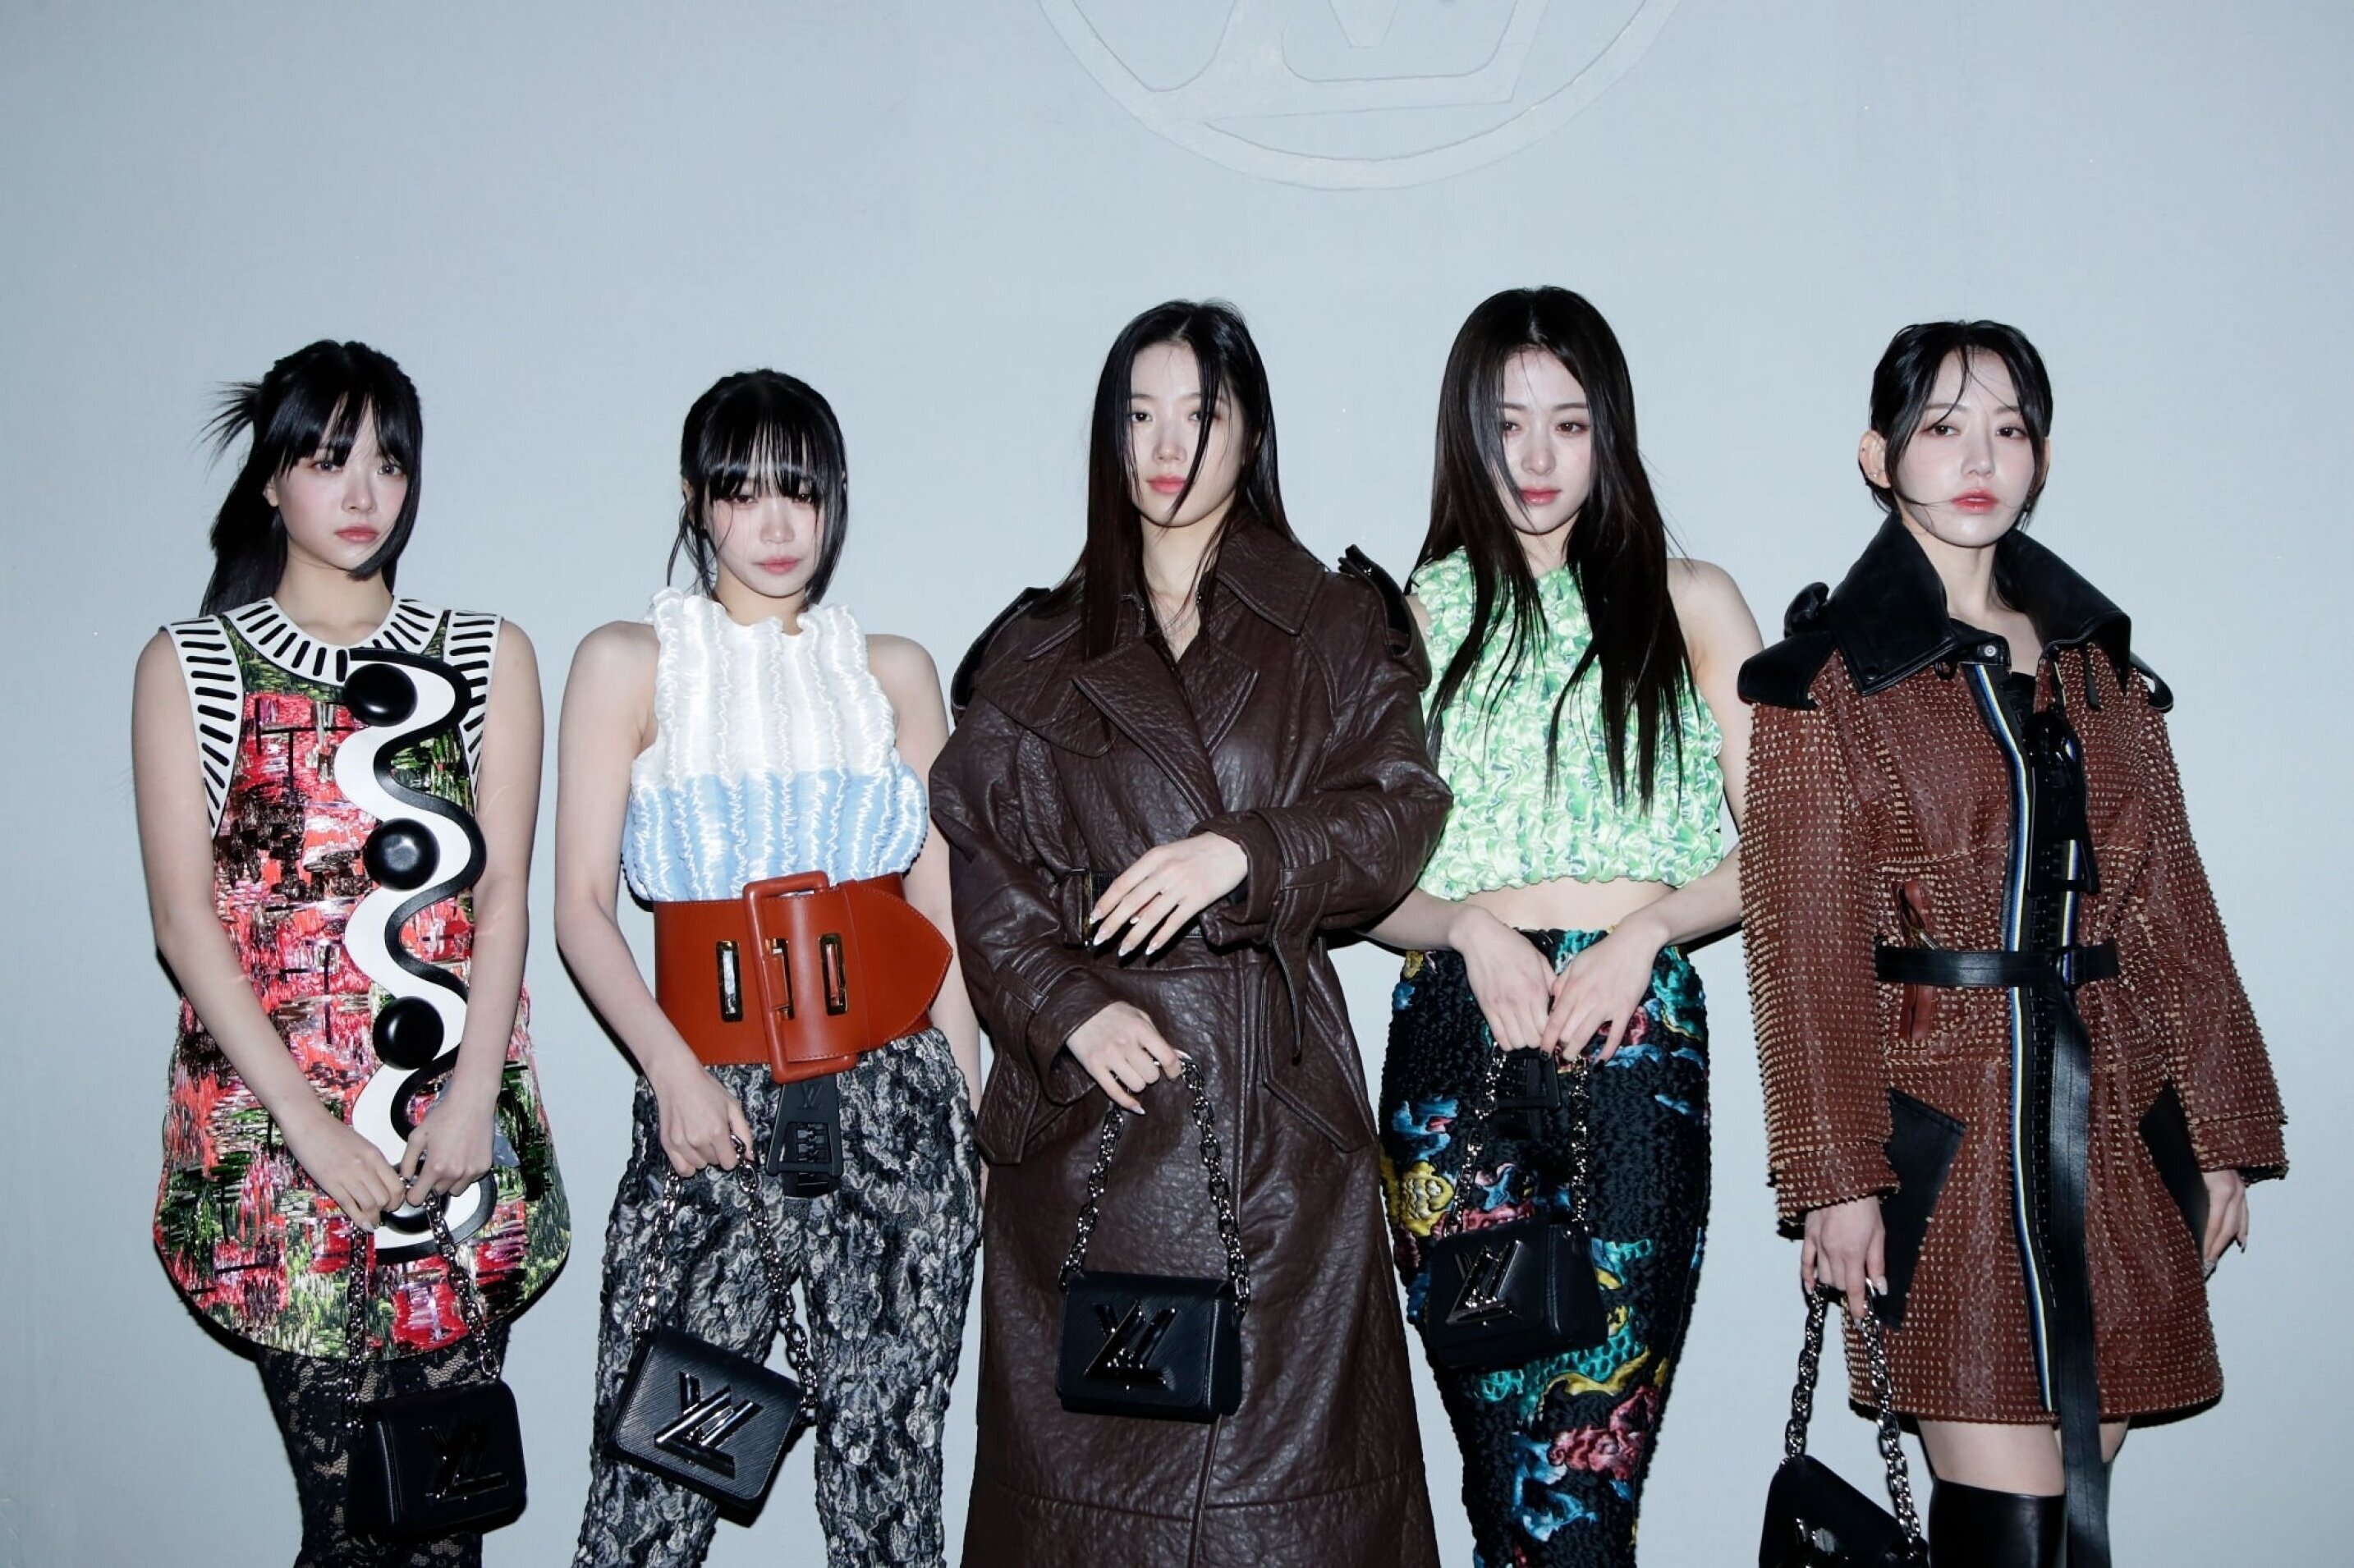 Louis Vuitton show: Best looks from Louis Vuitton's Pre Fall 2023 show in  Seoul